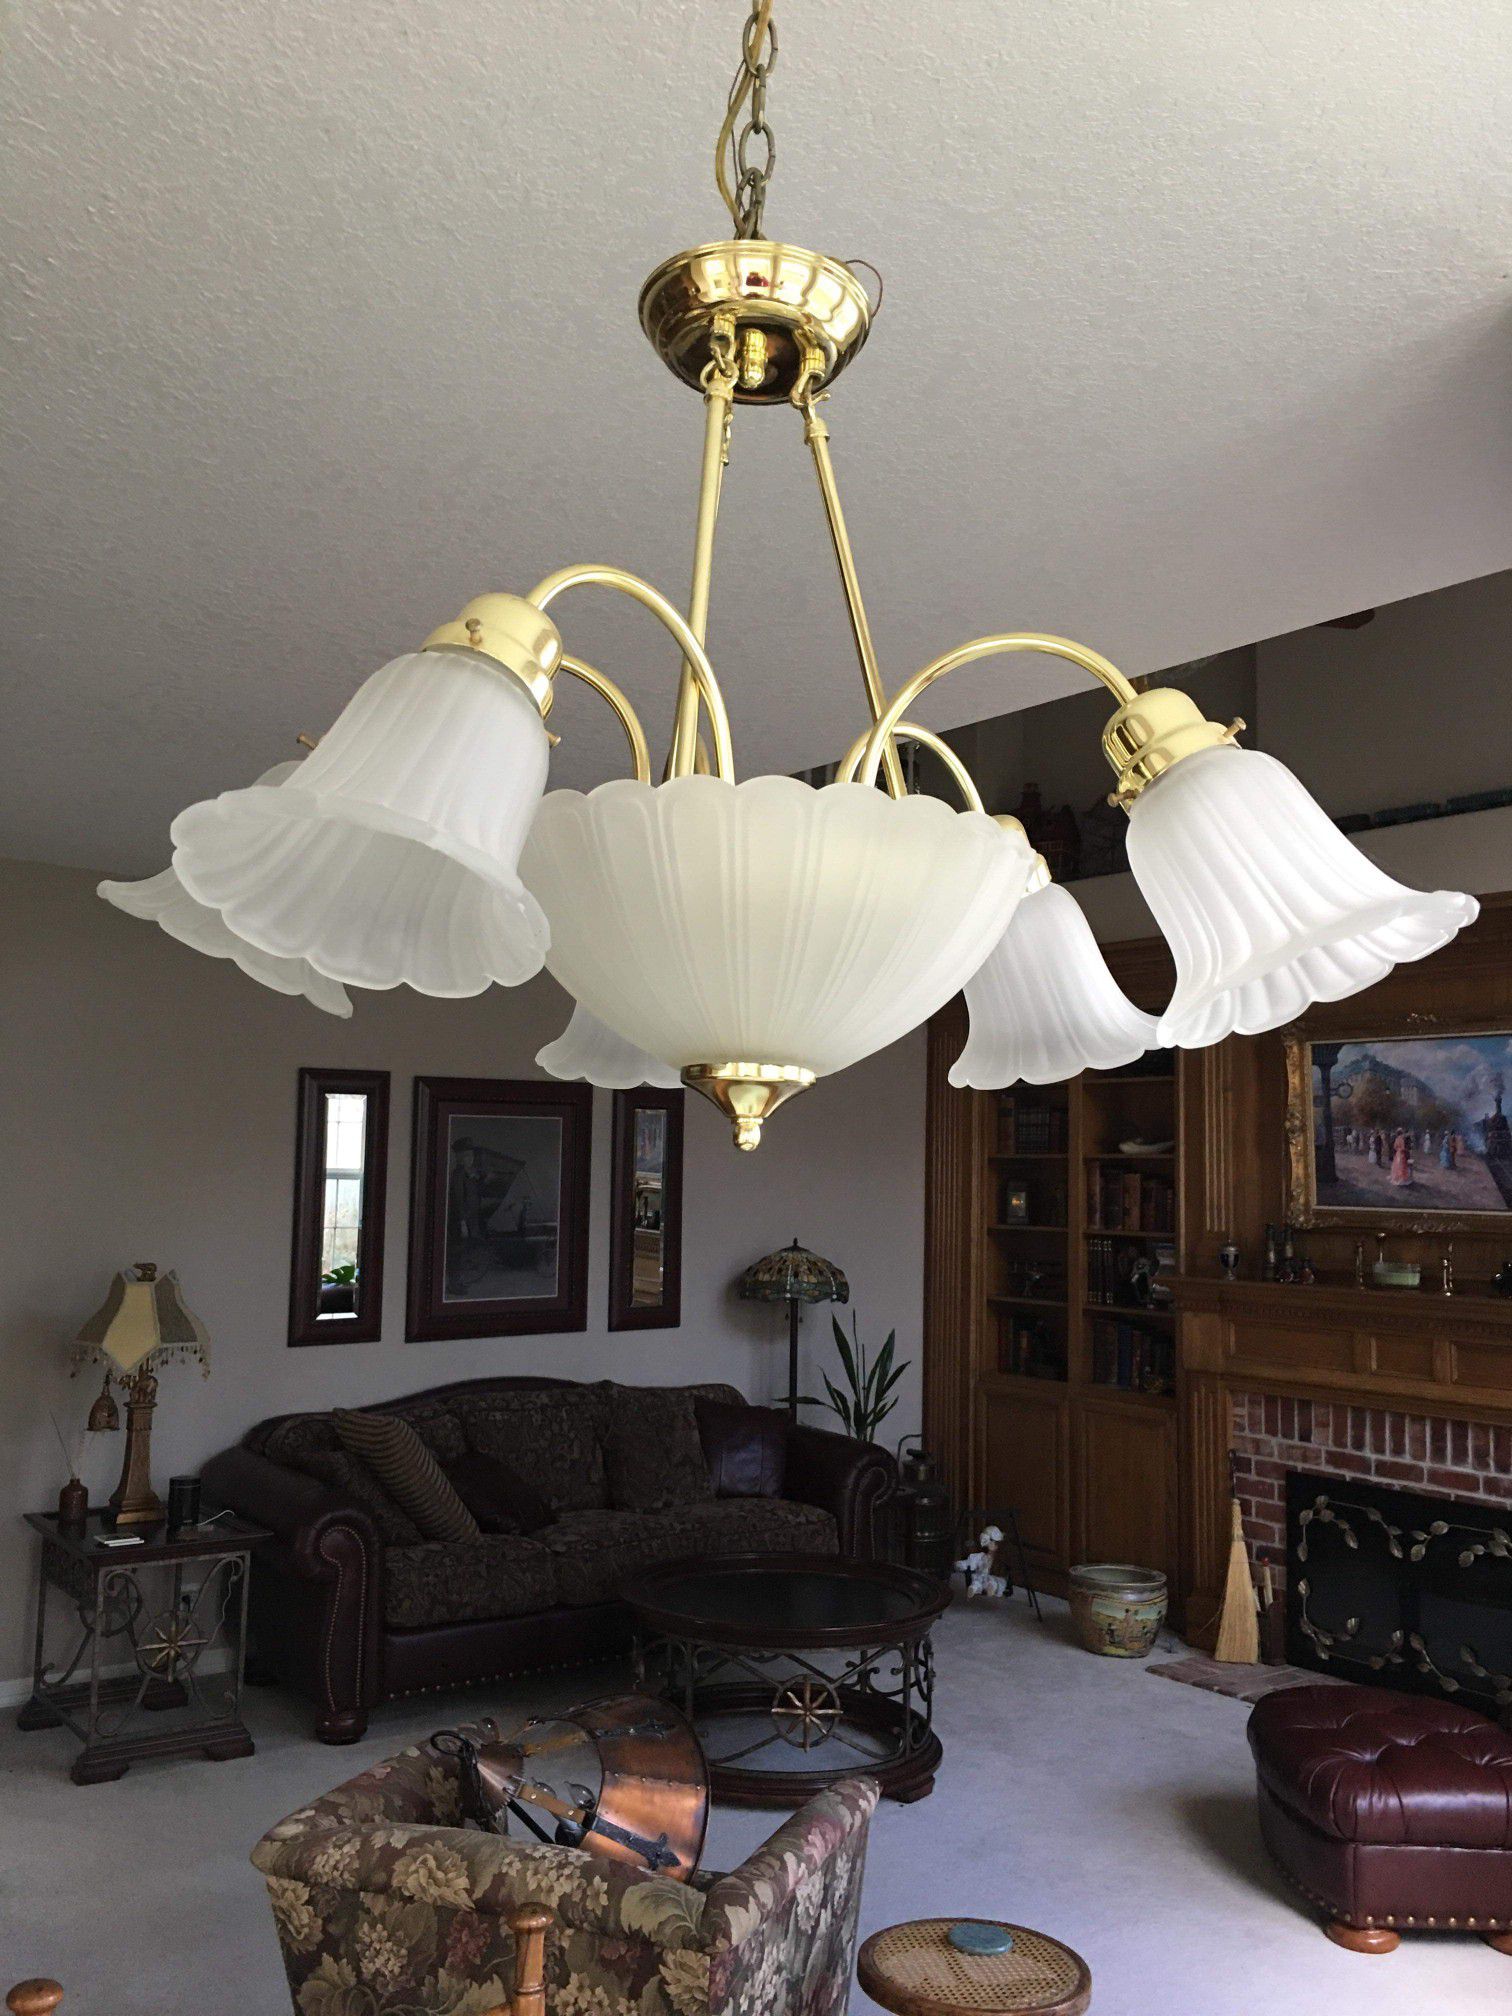 Brass Hanging Light Fixture with Frosted Glass lamps. Chandelier Pick up in Bethany area near Beaverton